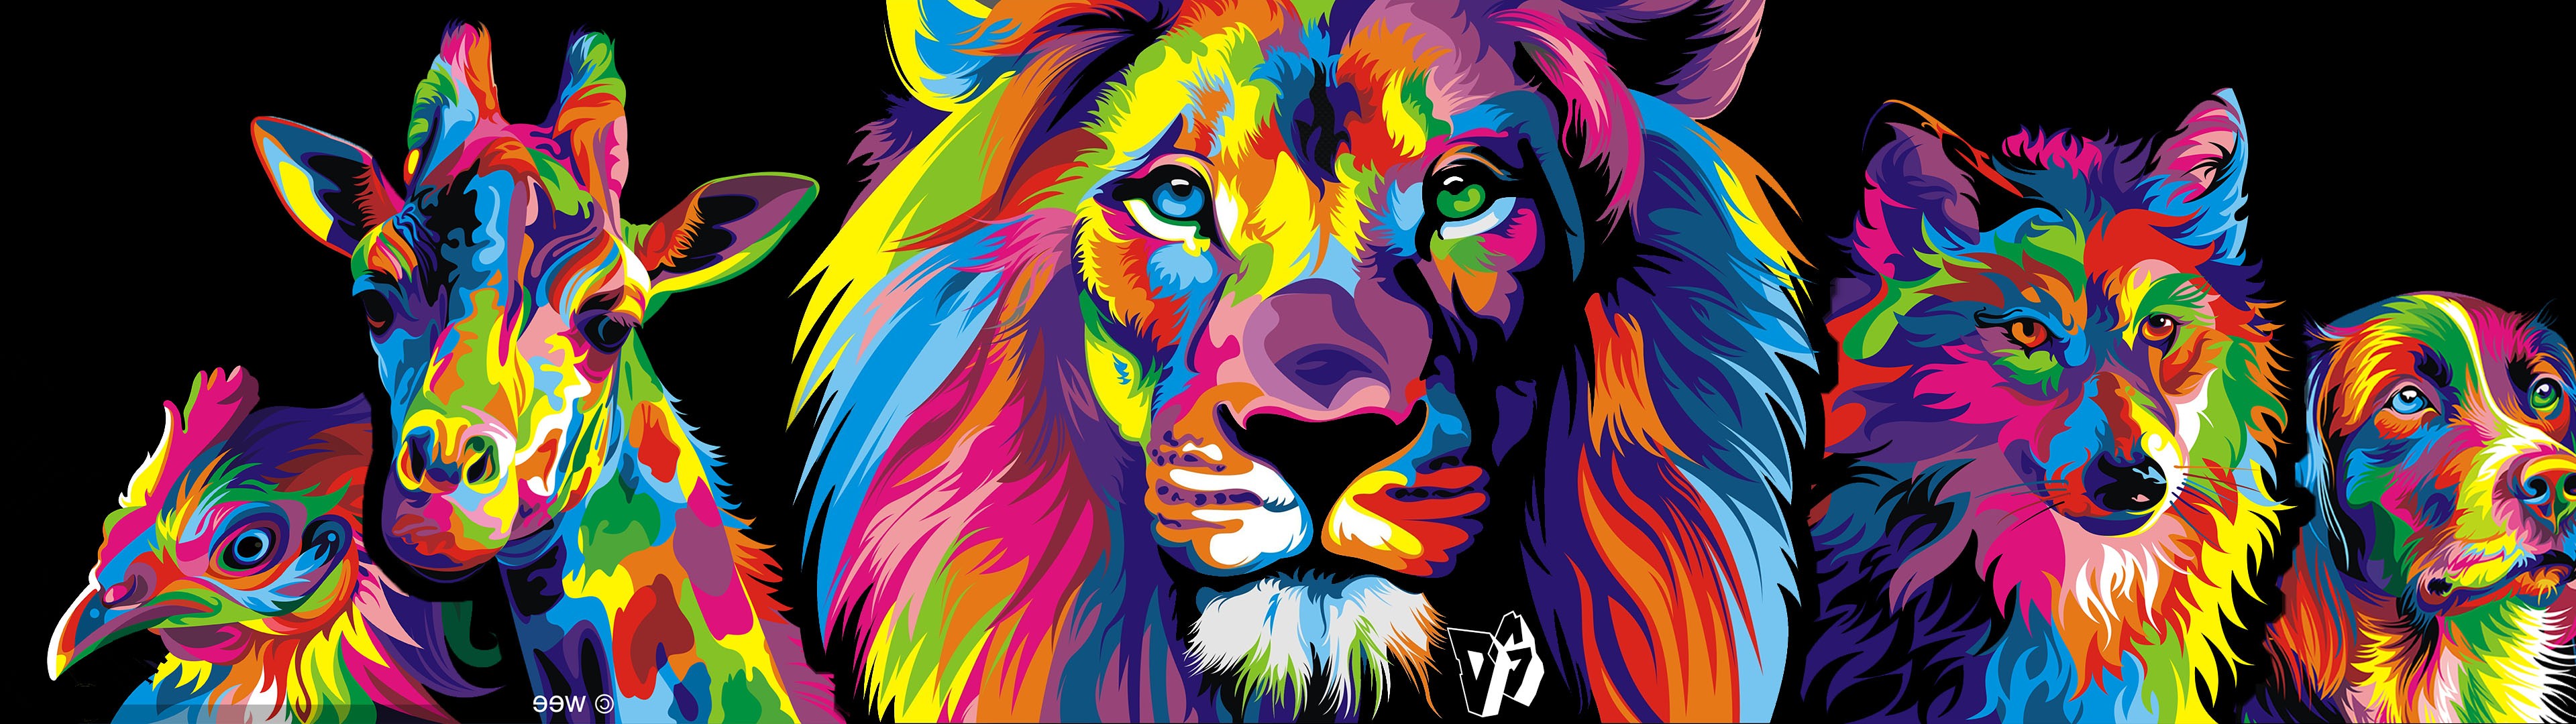 colorful, lion, chickens, dog, giraffes, animals, multiple display, wolf Gallery HD Wallpaper